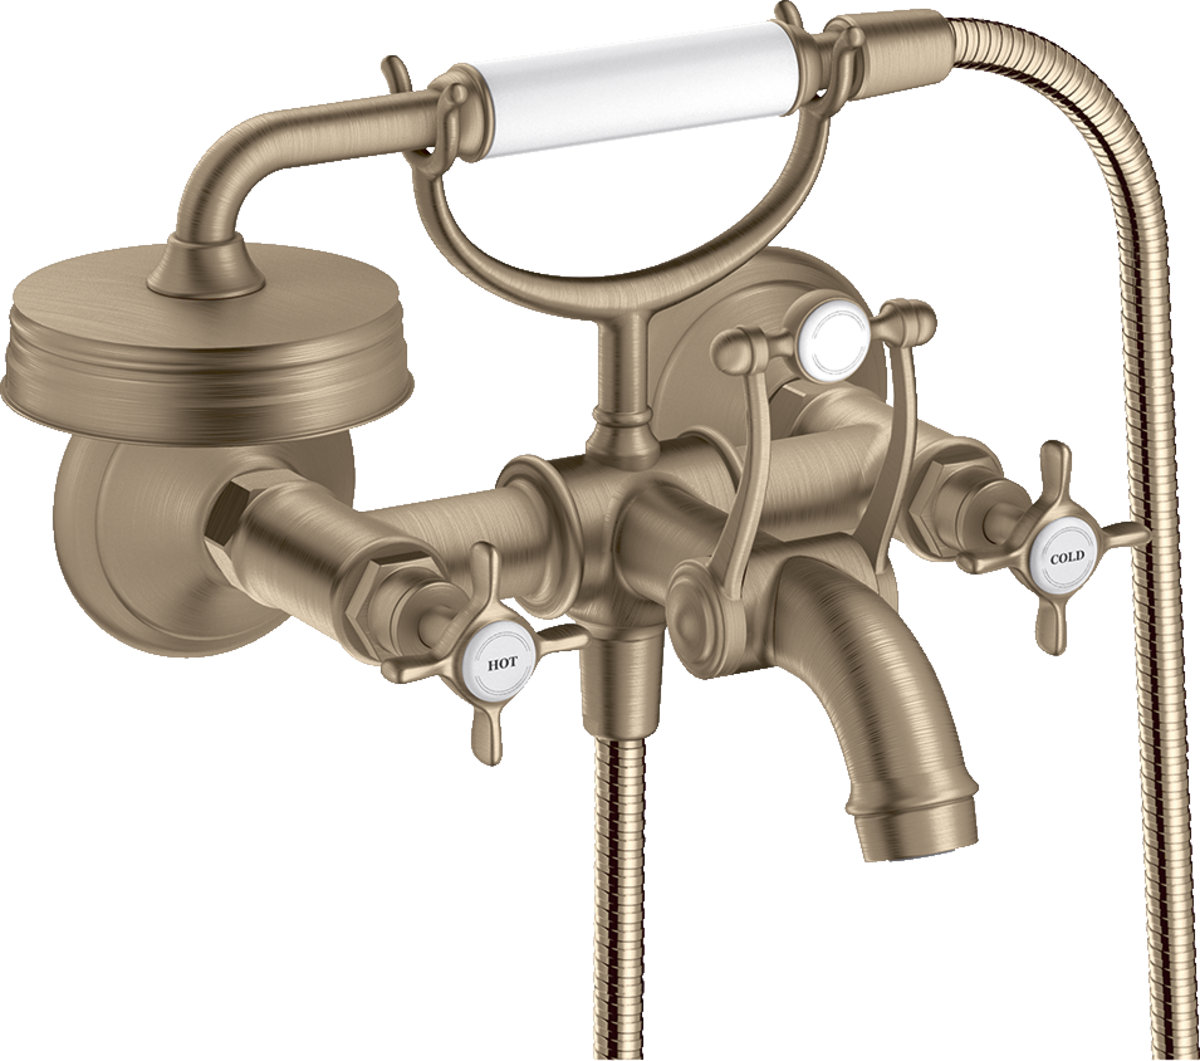 AXOR Montreux Double Handle Wall Mounted Clawfoot Faucet with Handshower | Wayfair